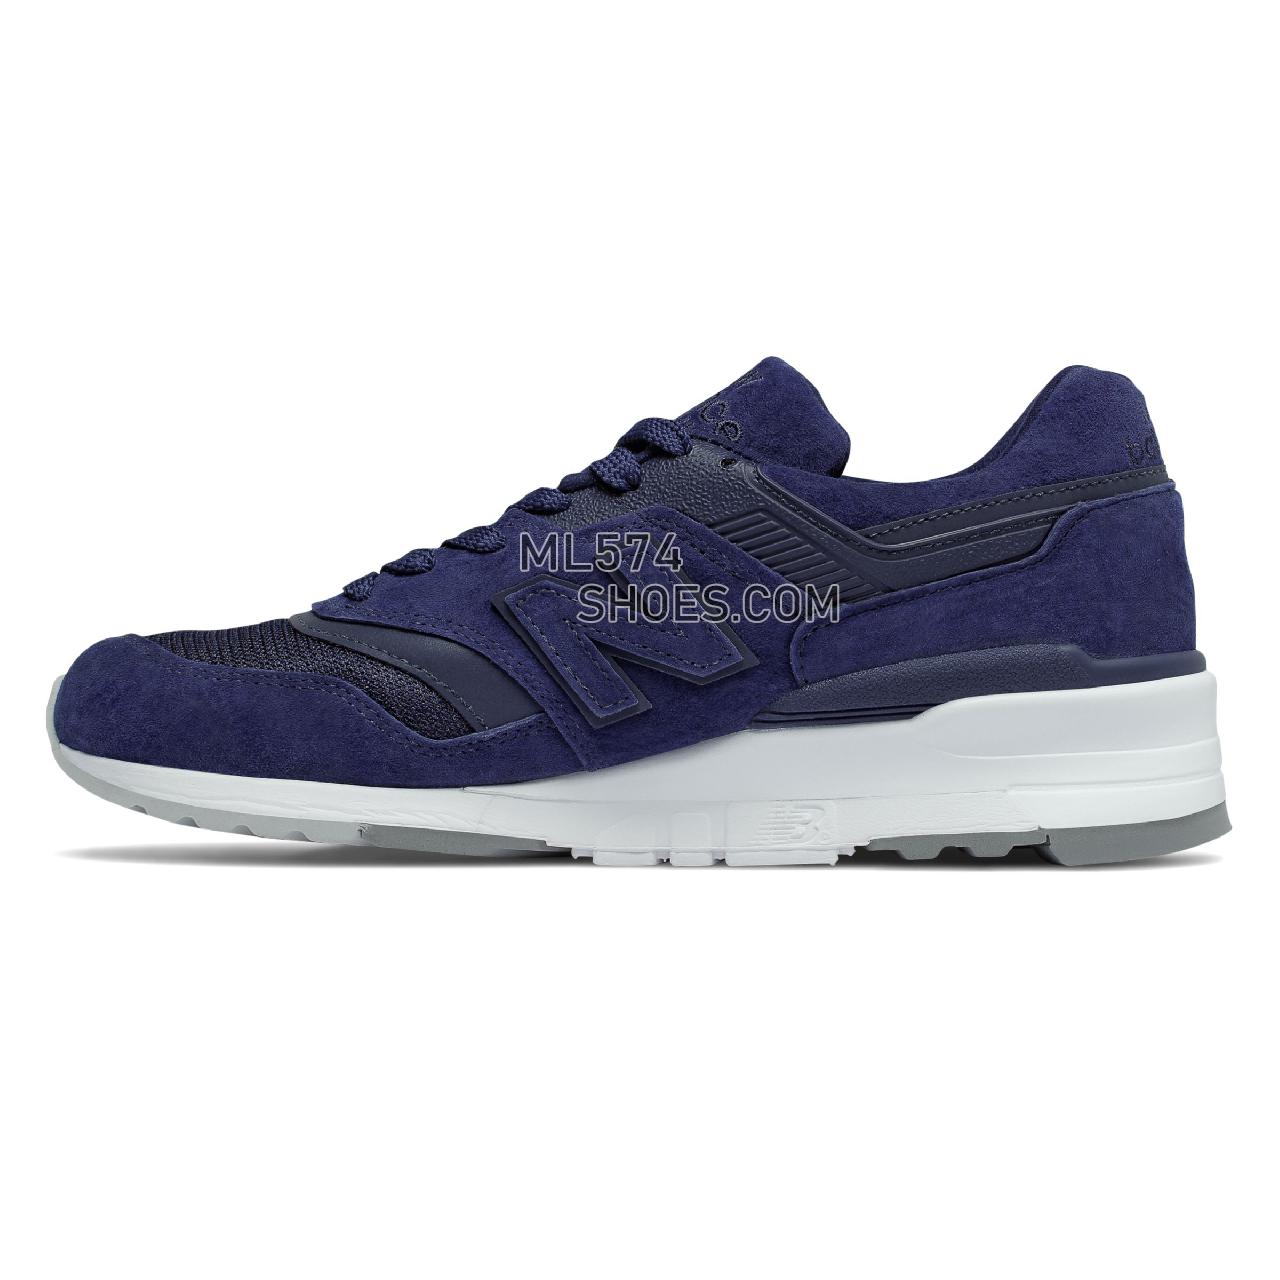 New Balance 997 Made in US Color Spectrum - Men's 997 - Classic Pigment with Navy - M997CO